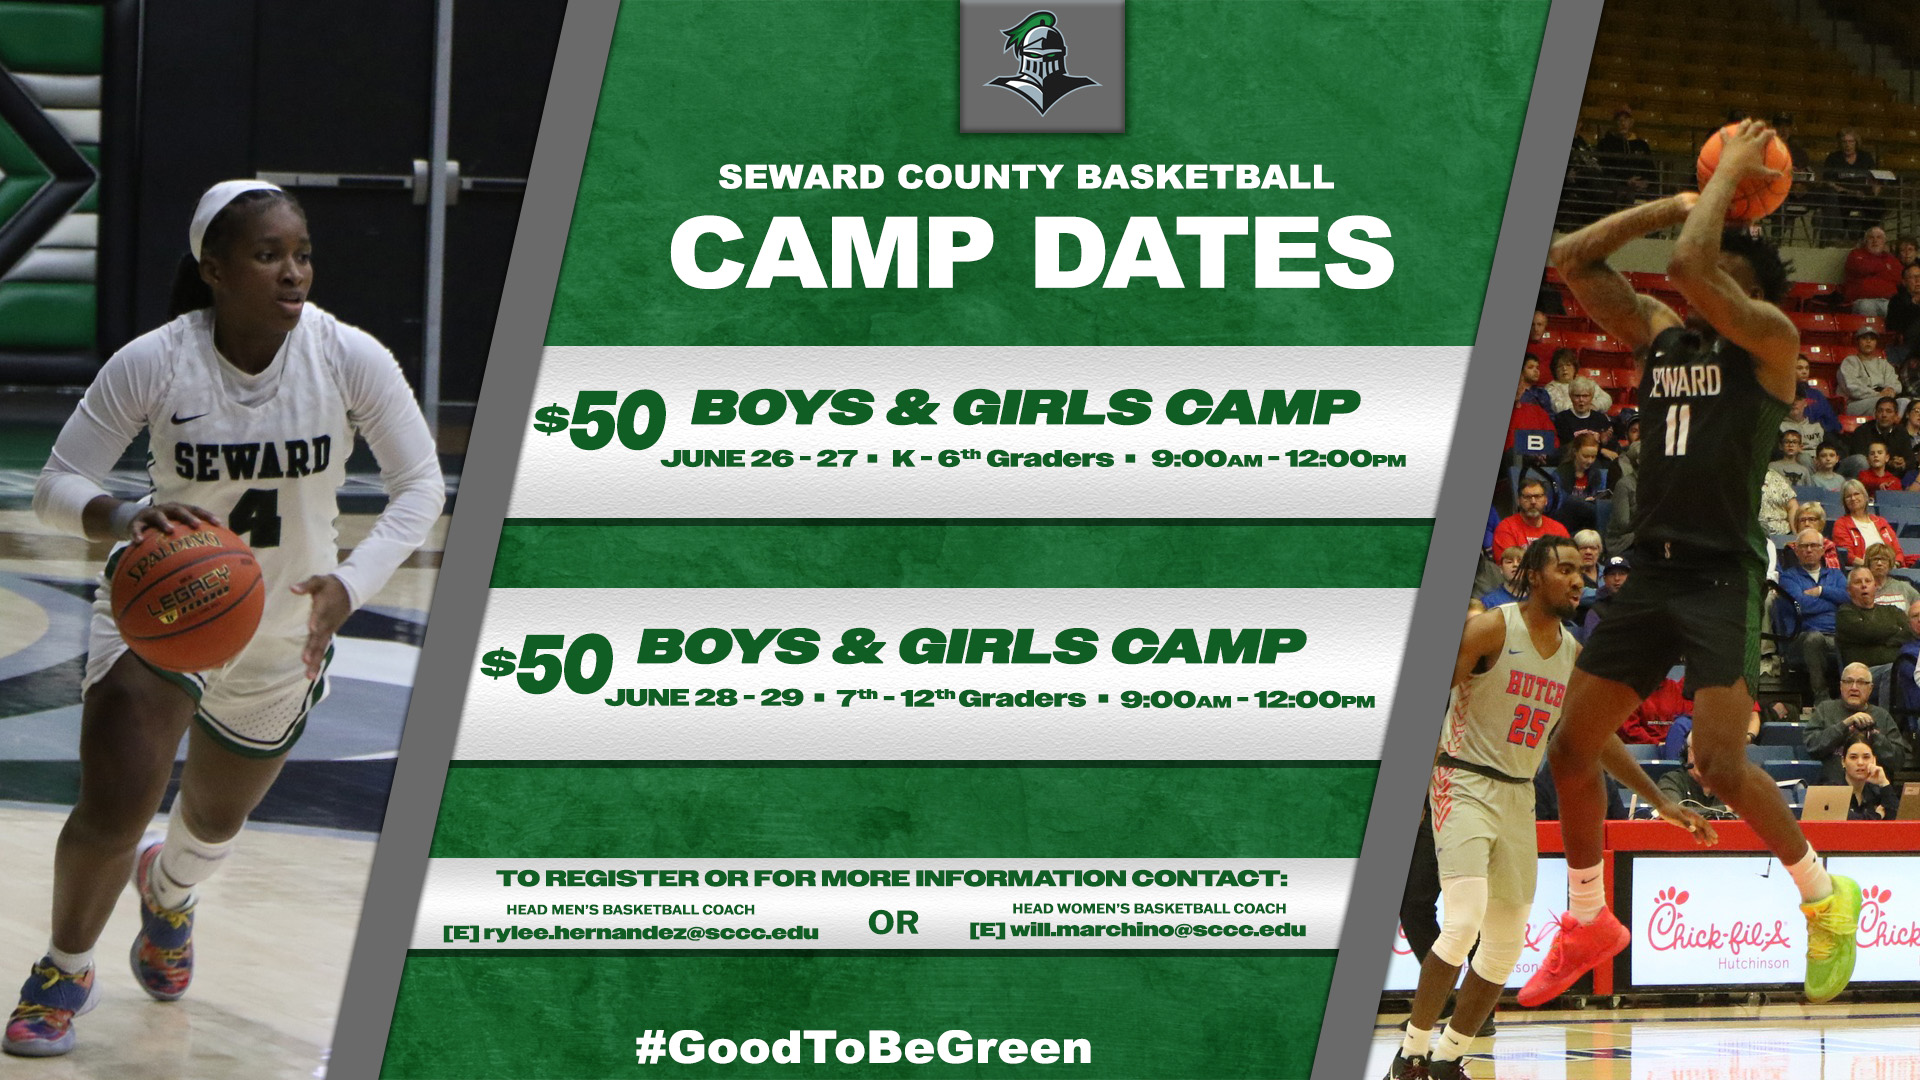 Seward County Men's and Women's basketball programs to hold joint camp